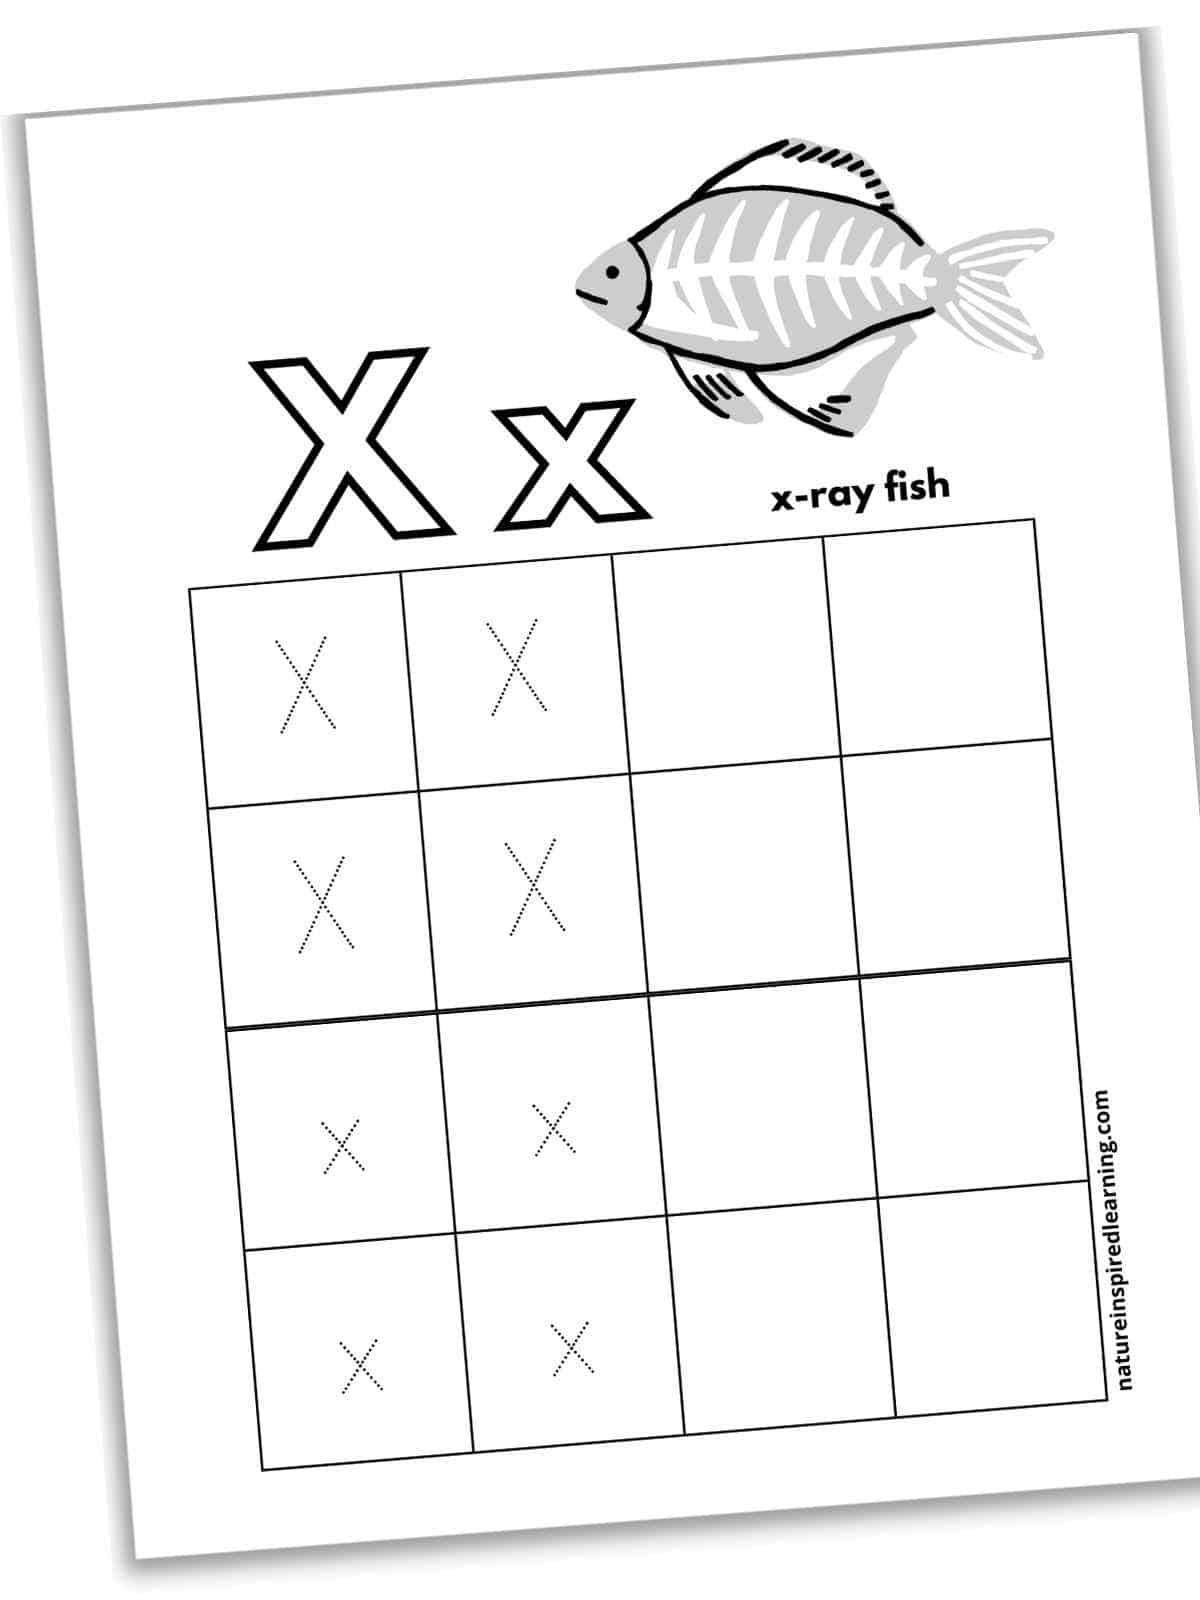 worksheet with X x in dotted font with in square boxes below a black and white x-ray fish